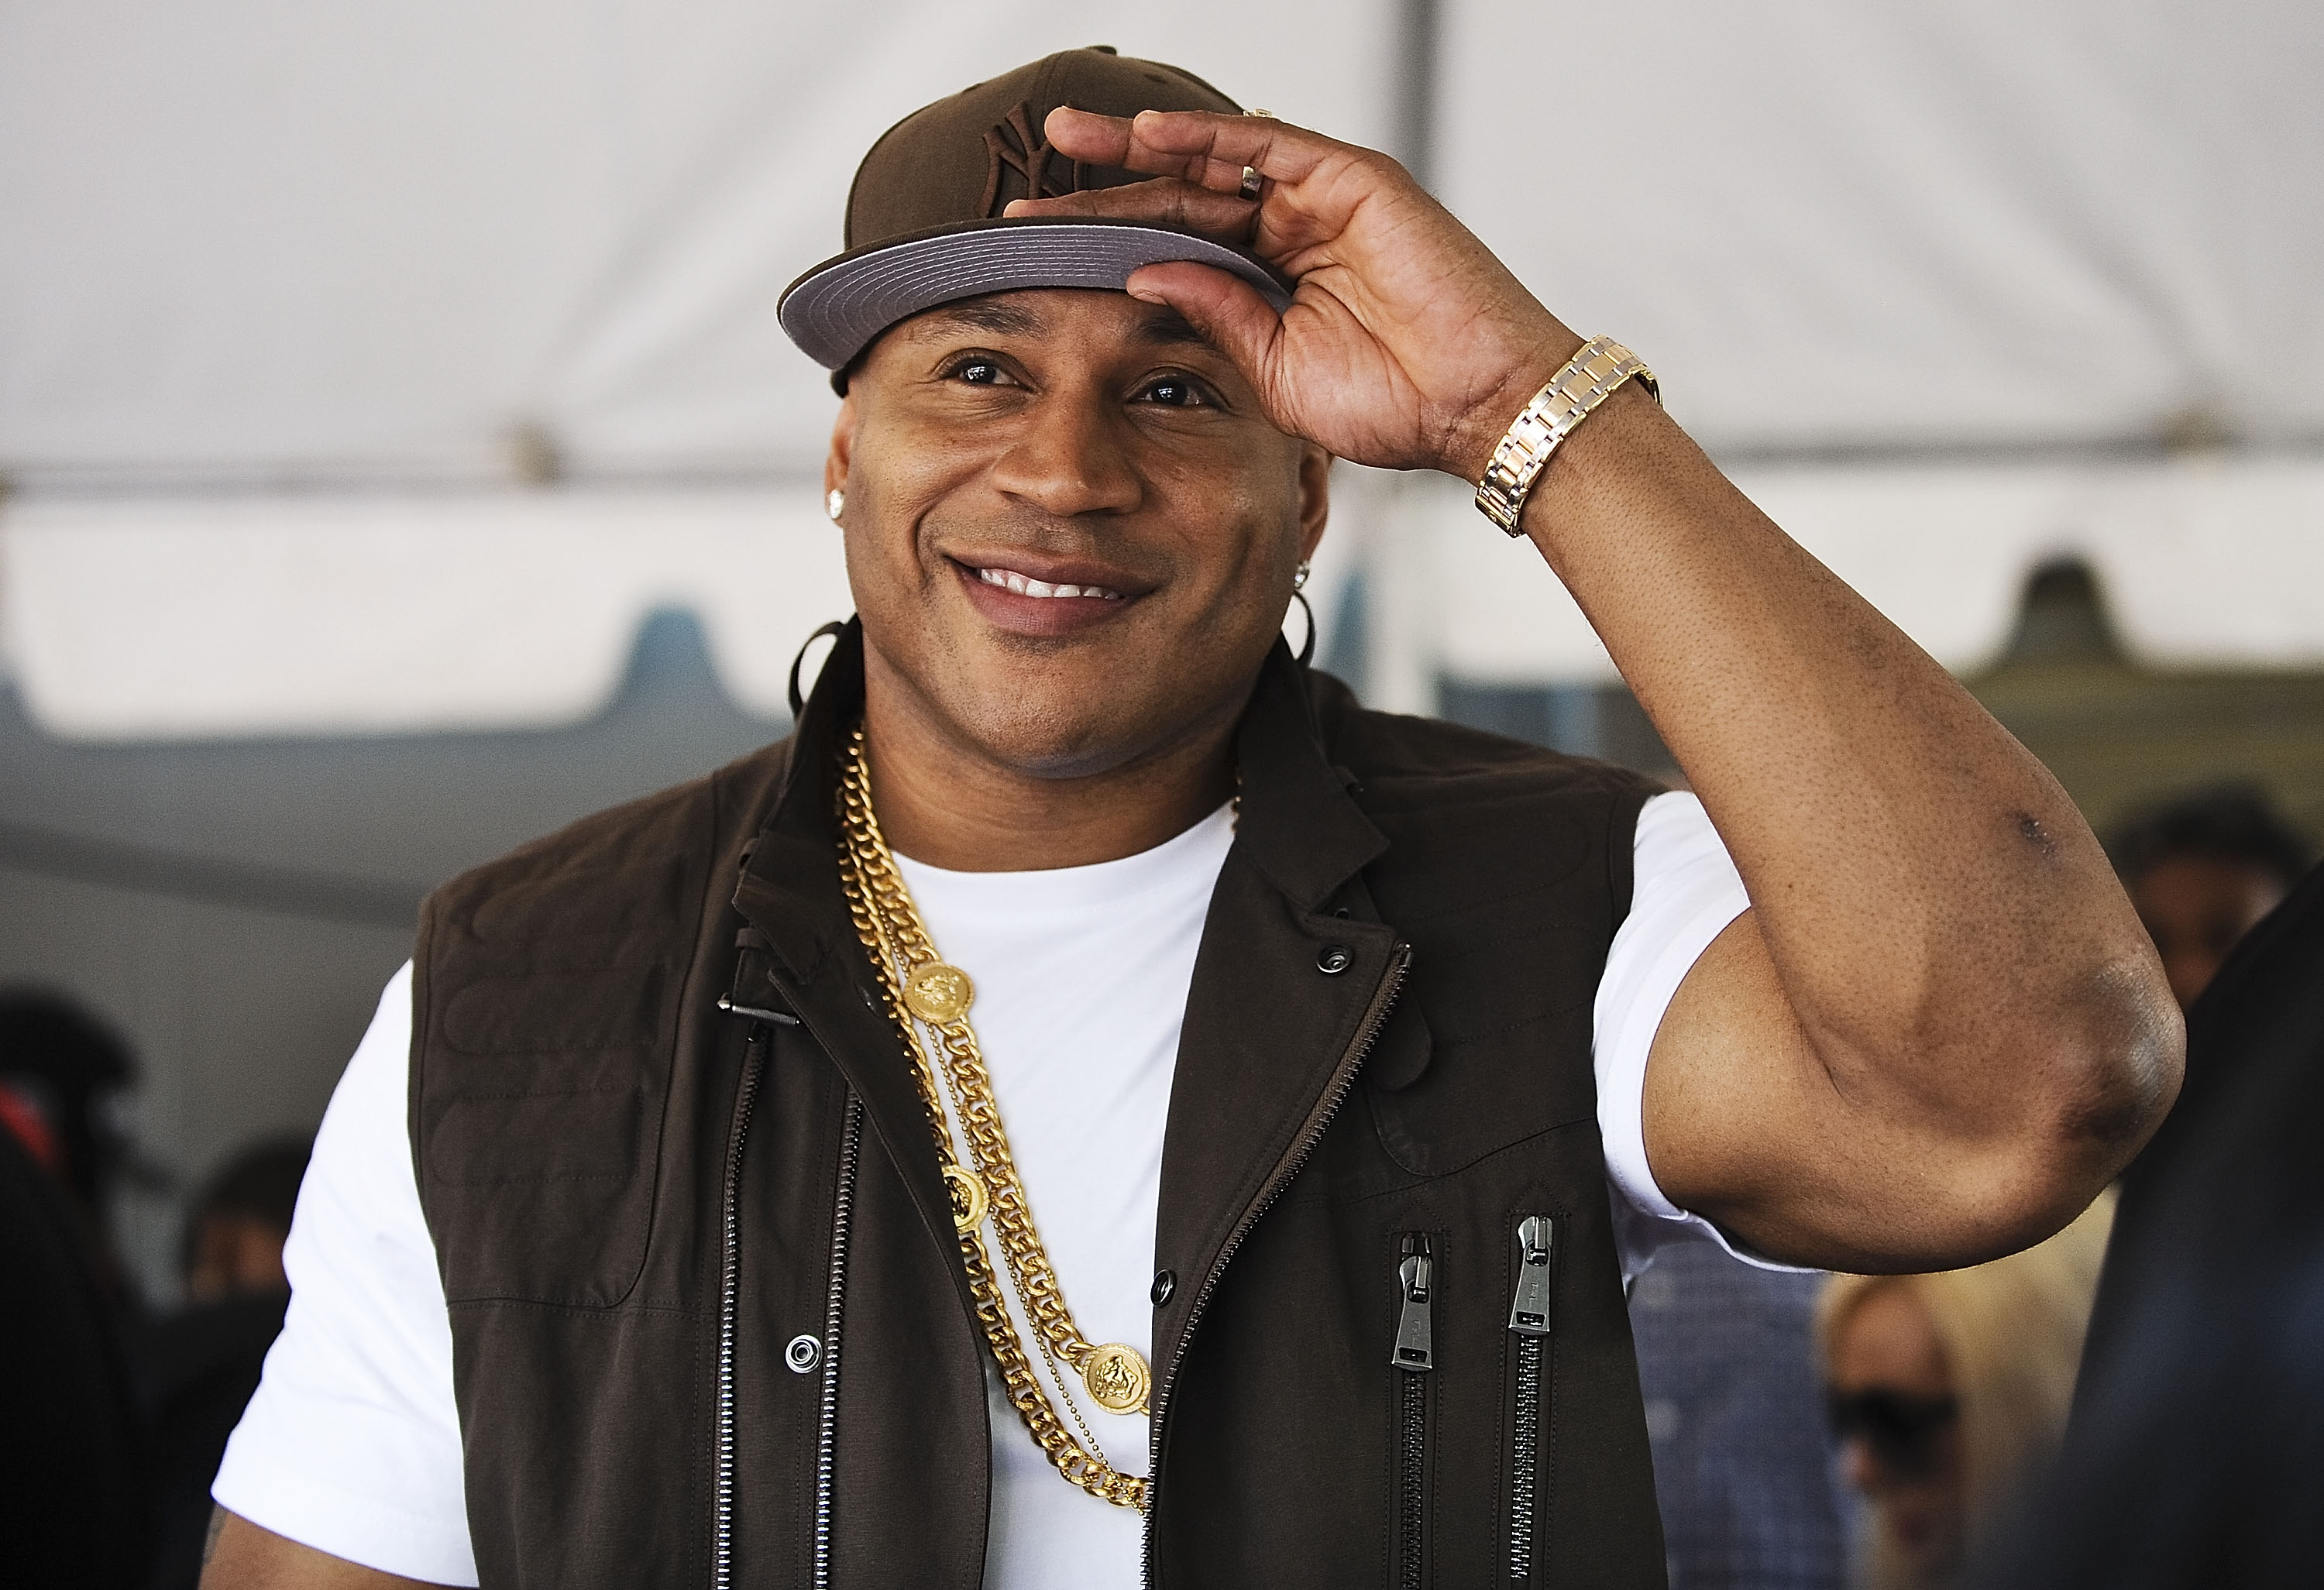  LL Cool J attends the 2nd Annual Worldstar Foundation Back To School Giveaway at Jamaica Colosseum Mall in New York City on August 24, 2014. | Photo: Getty Images